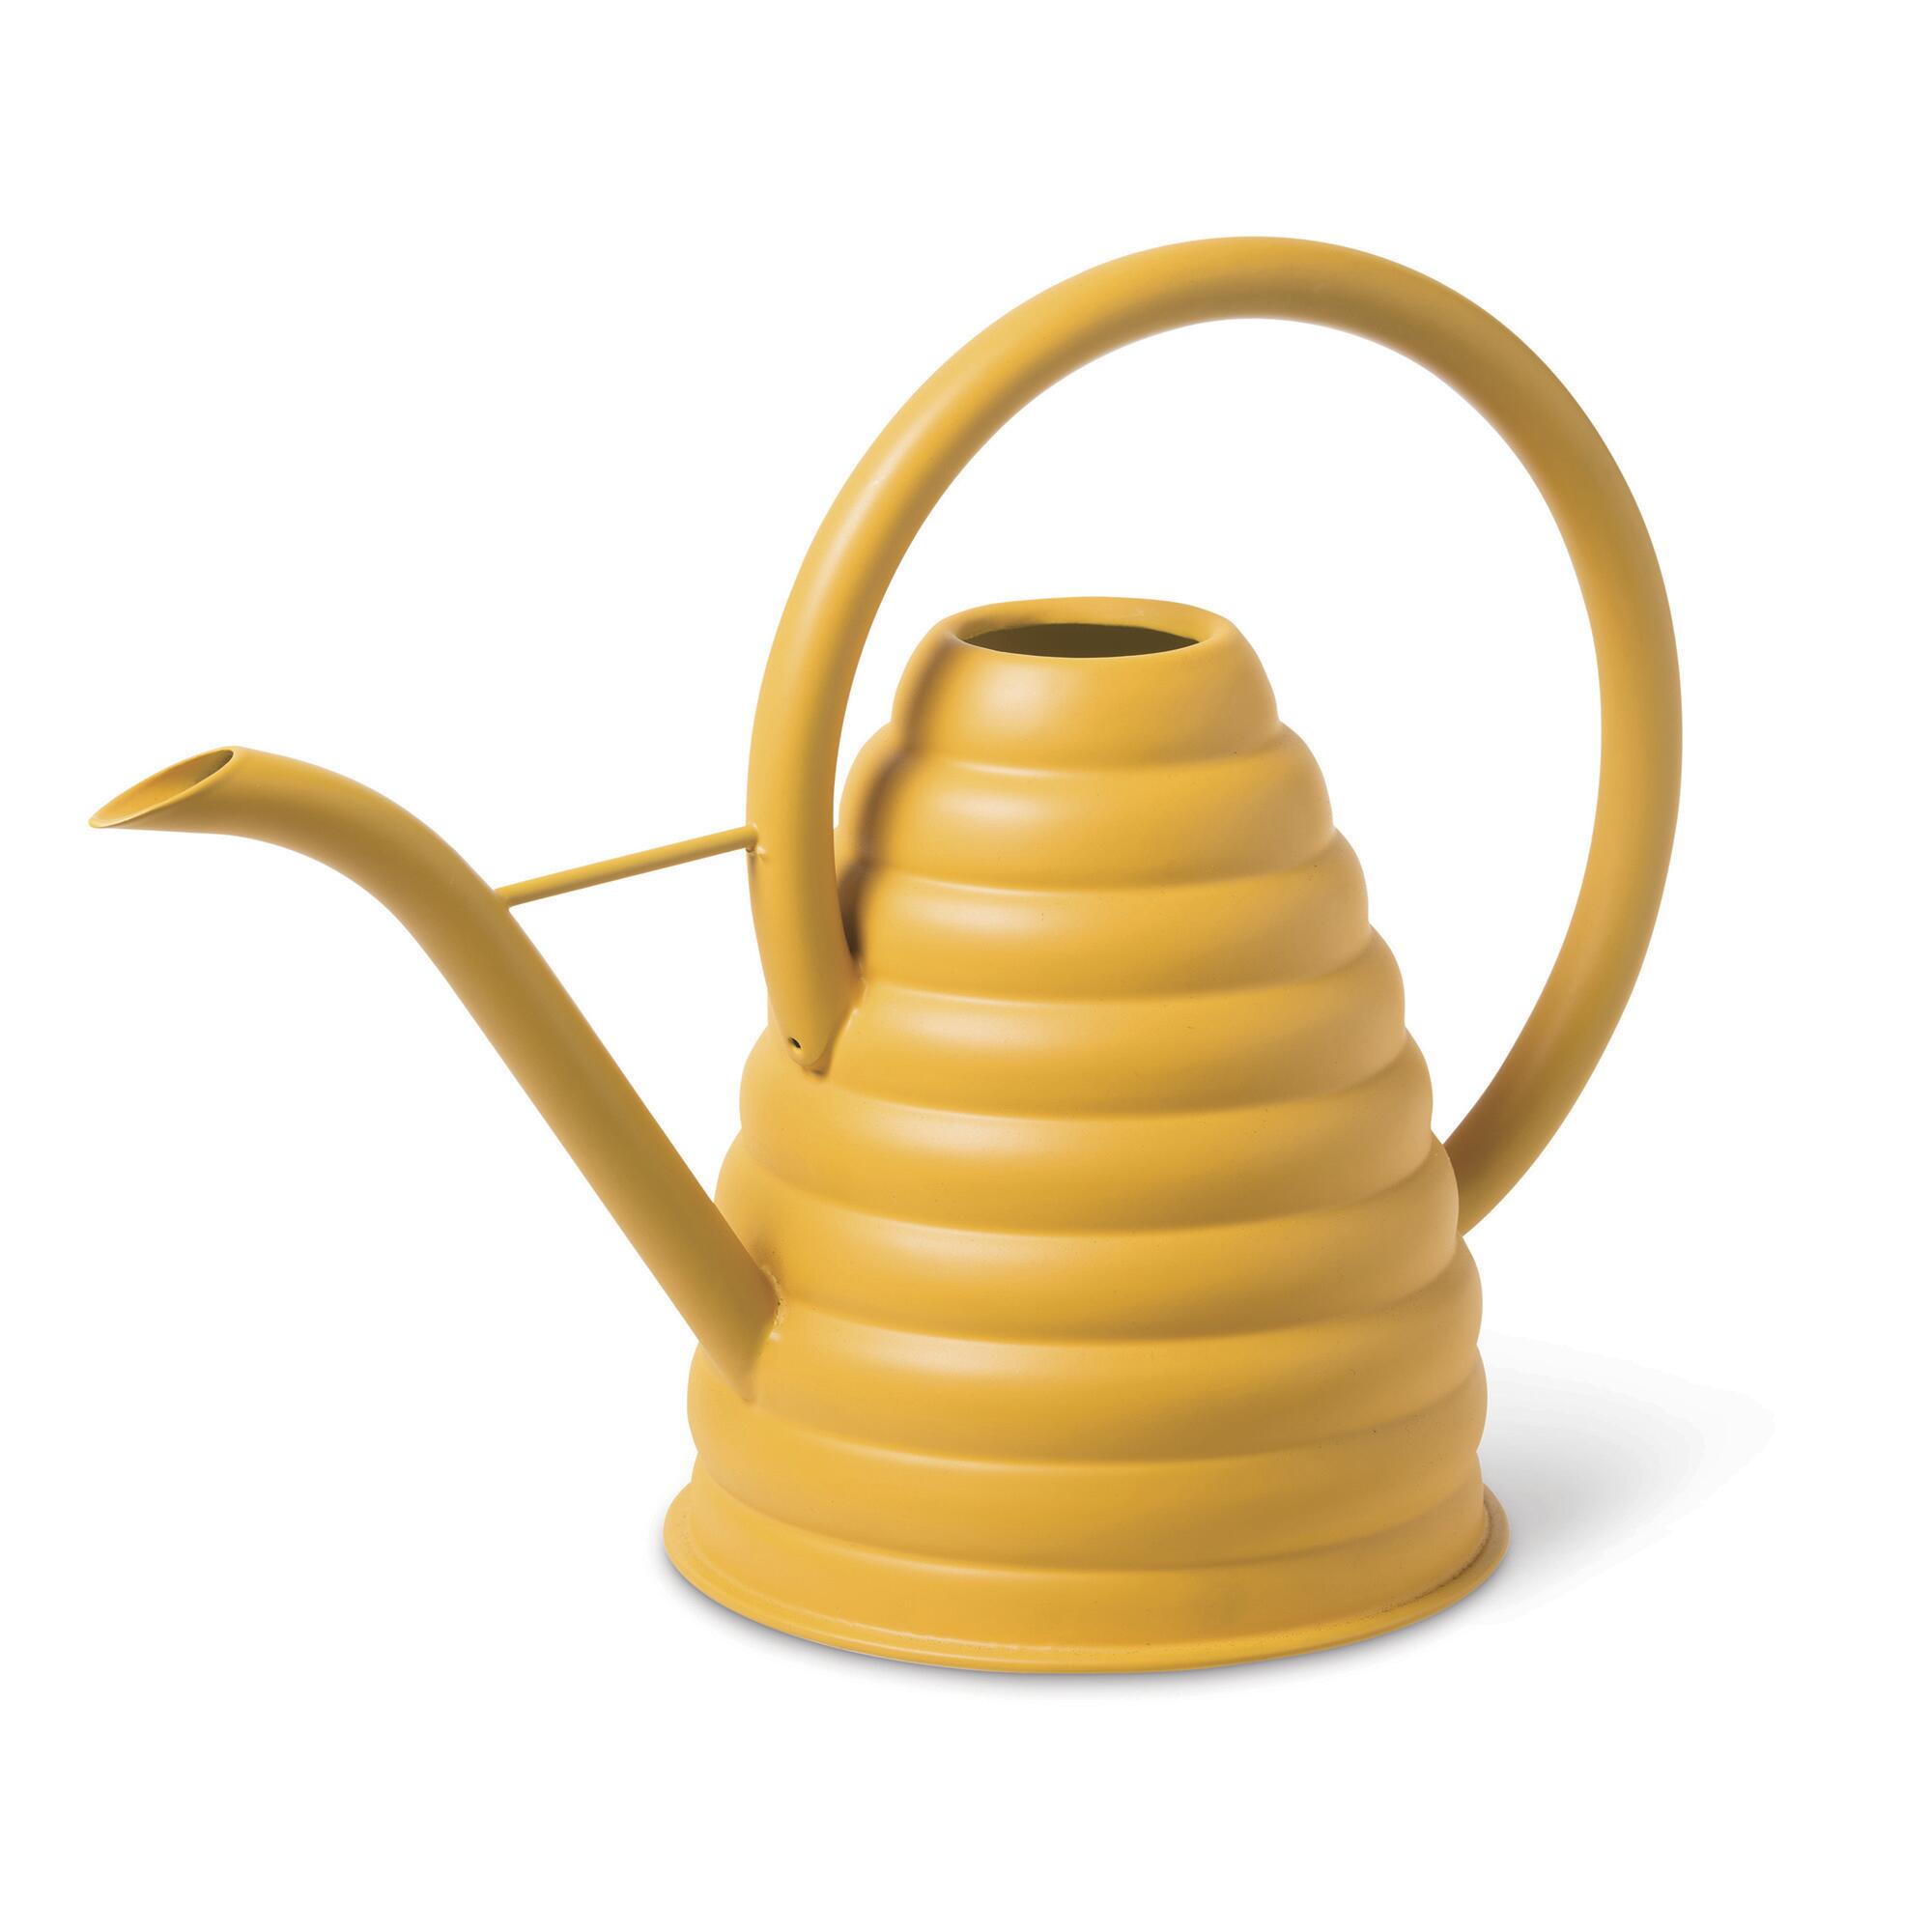 Bee Skep watering can from Gardener's Supply Company.